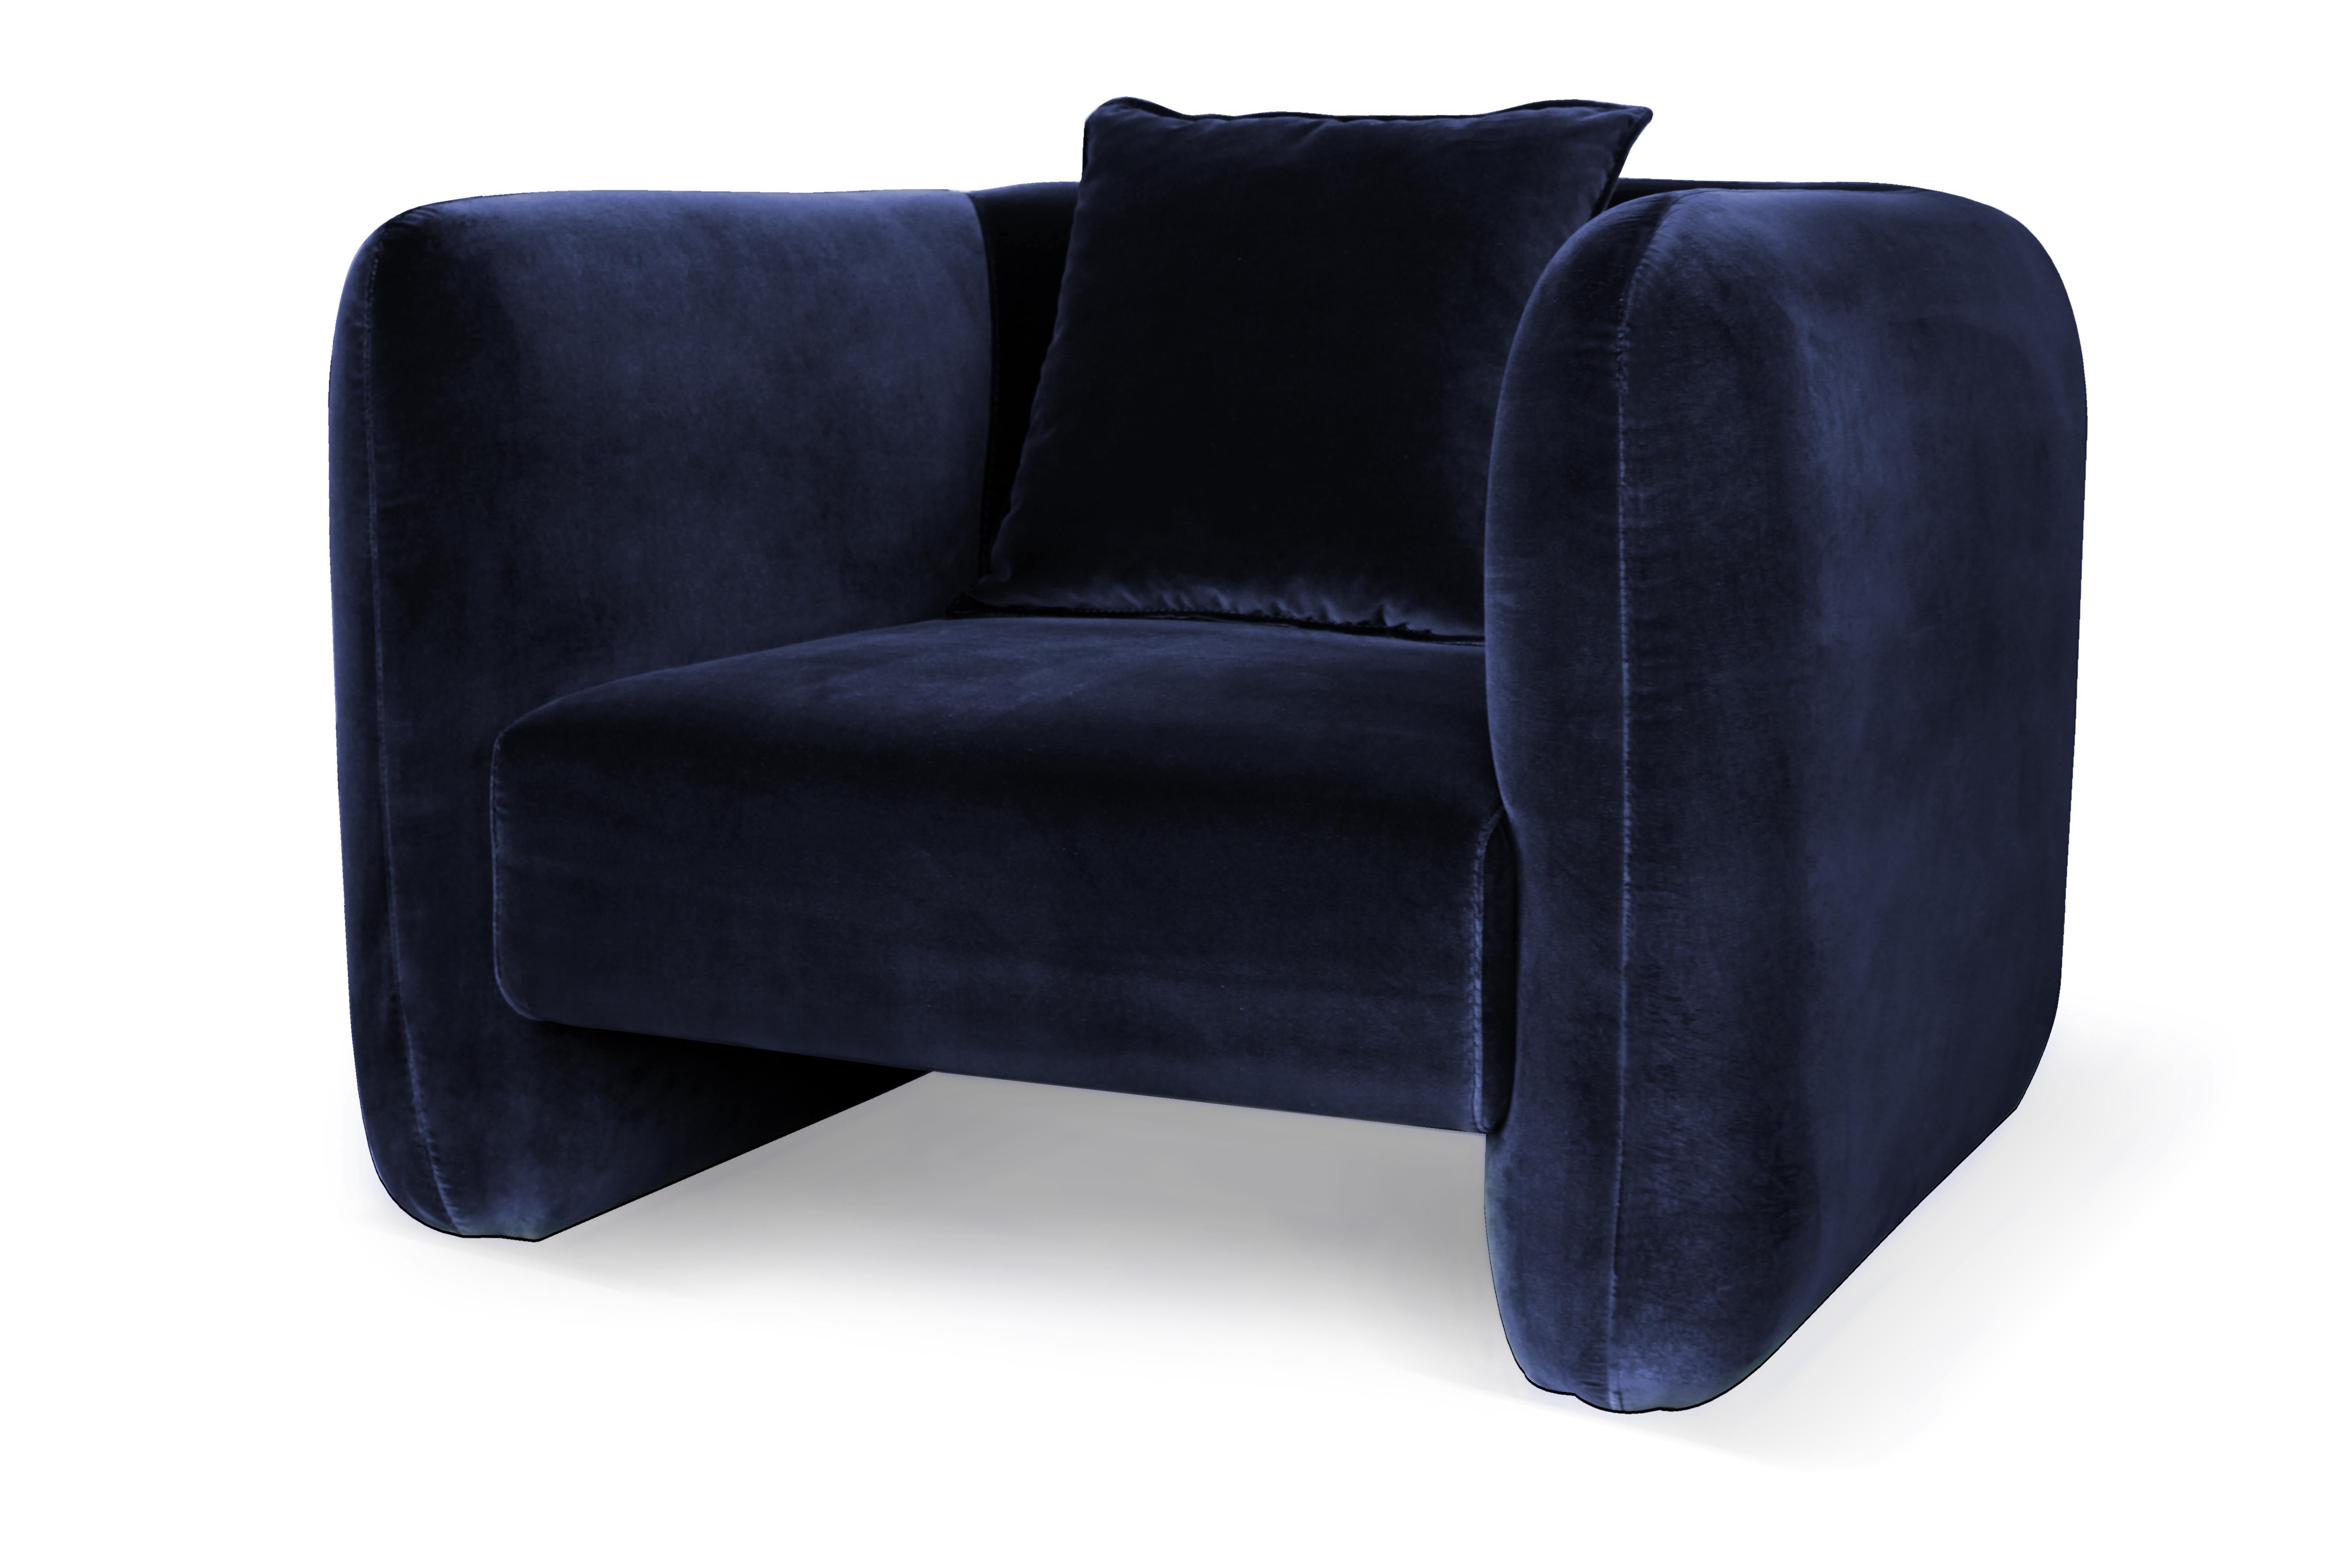 Contemporary Modern Jacob Armchair in Blue Fabric by Collector Studio

This fun and sophisticated 21st century armchair designed by Collector Studio, with its simple shape and attractive color game along with other possible combinations of materials